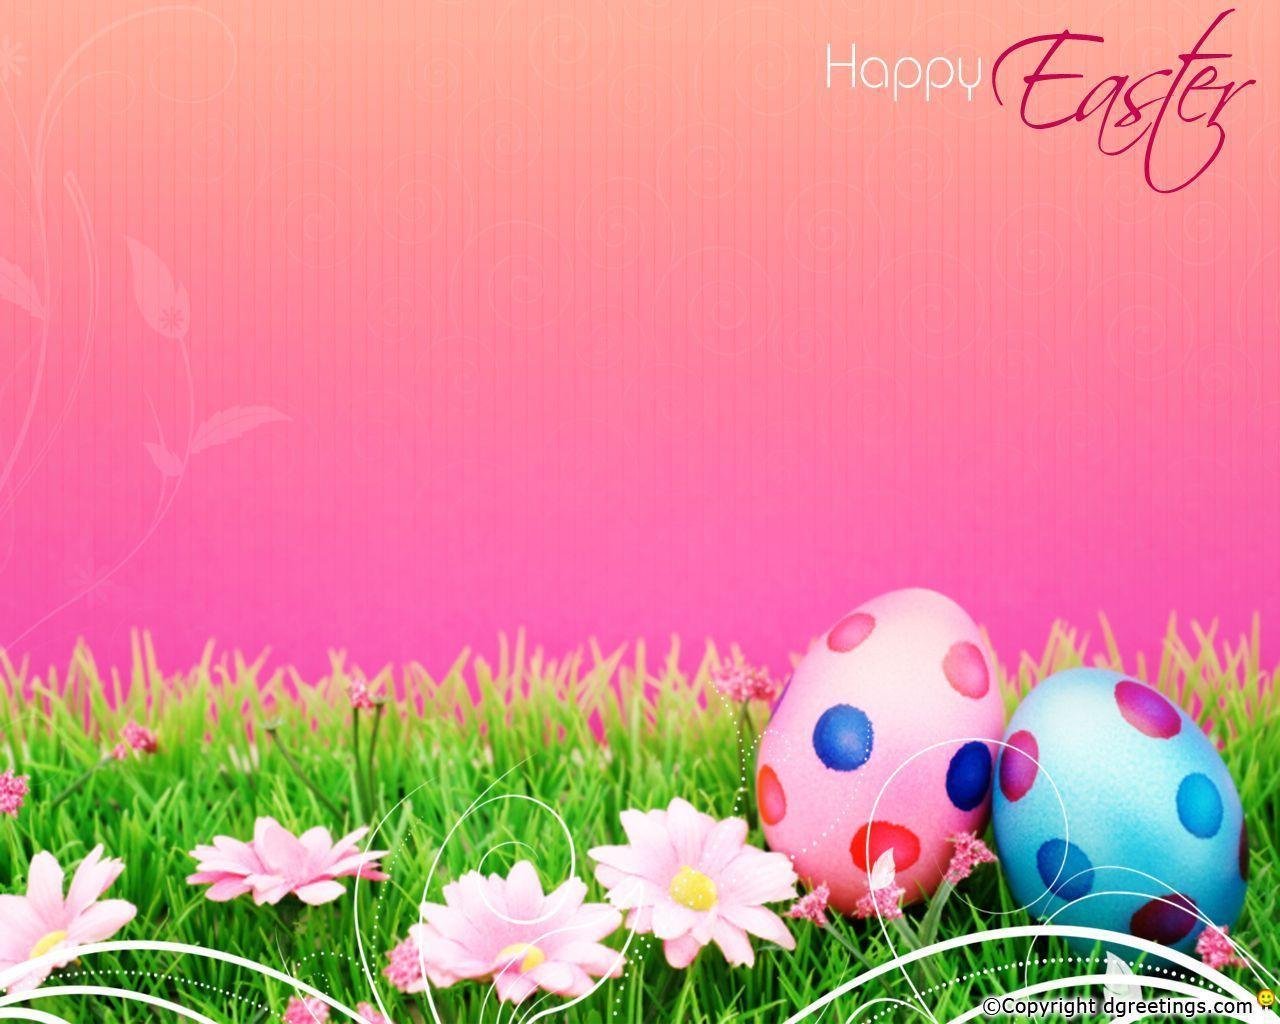 Wallpapers For > Cute Easter Backgrounds Tumblr